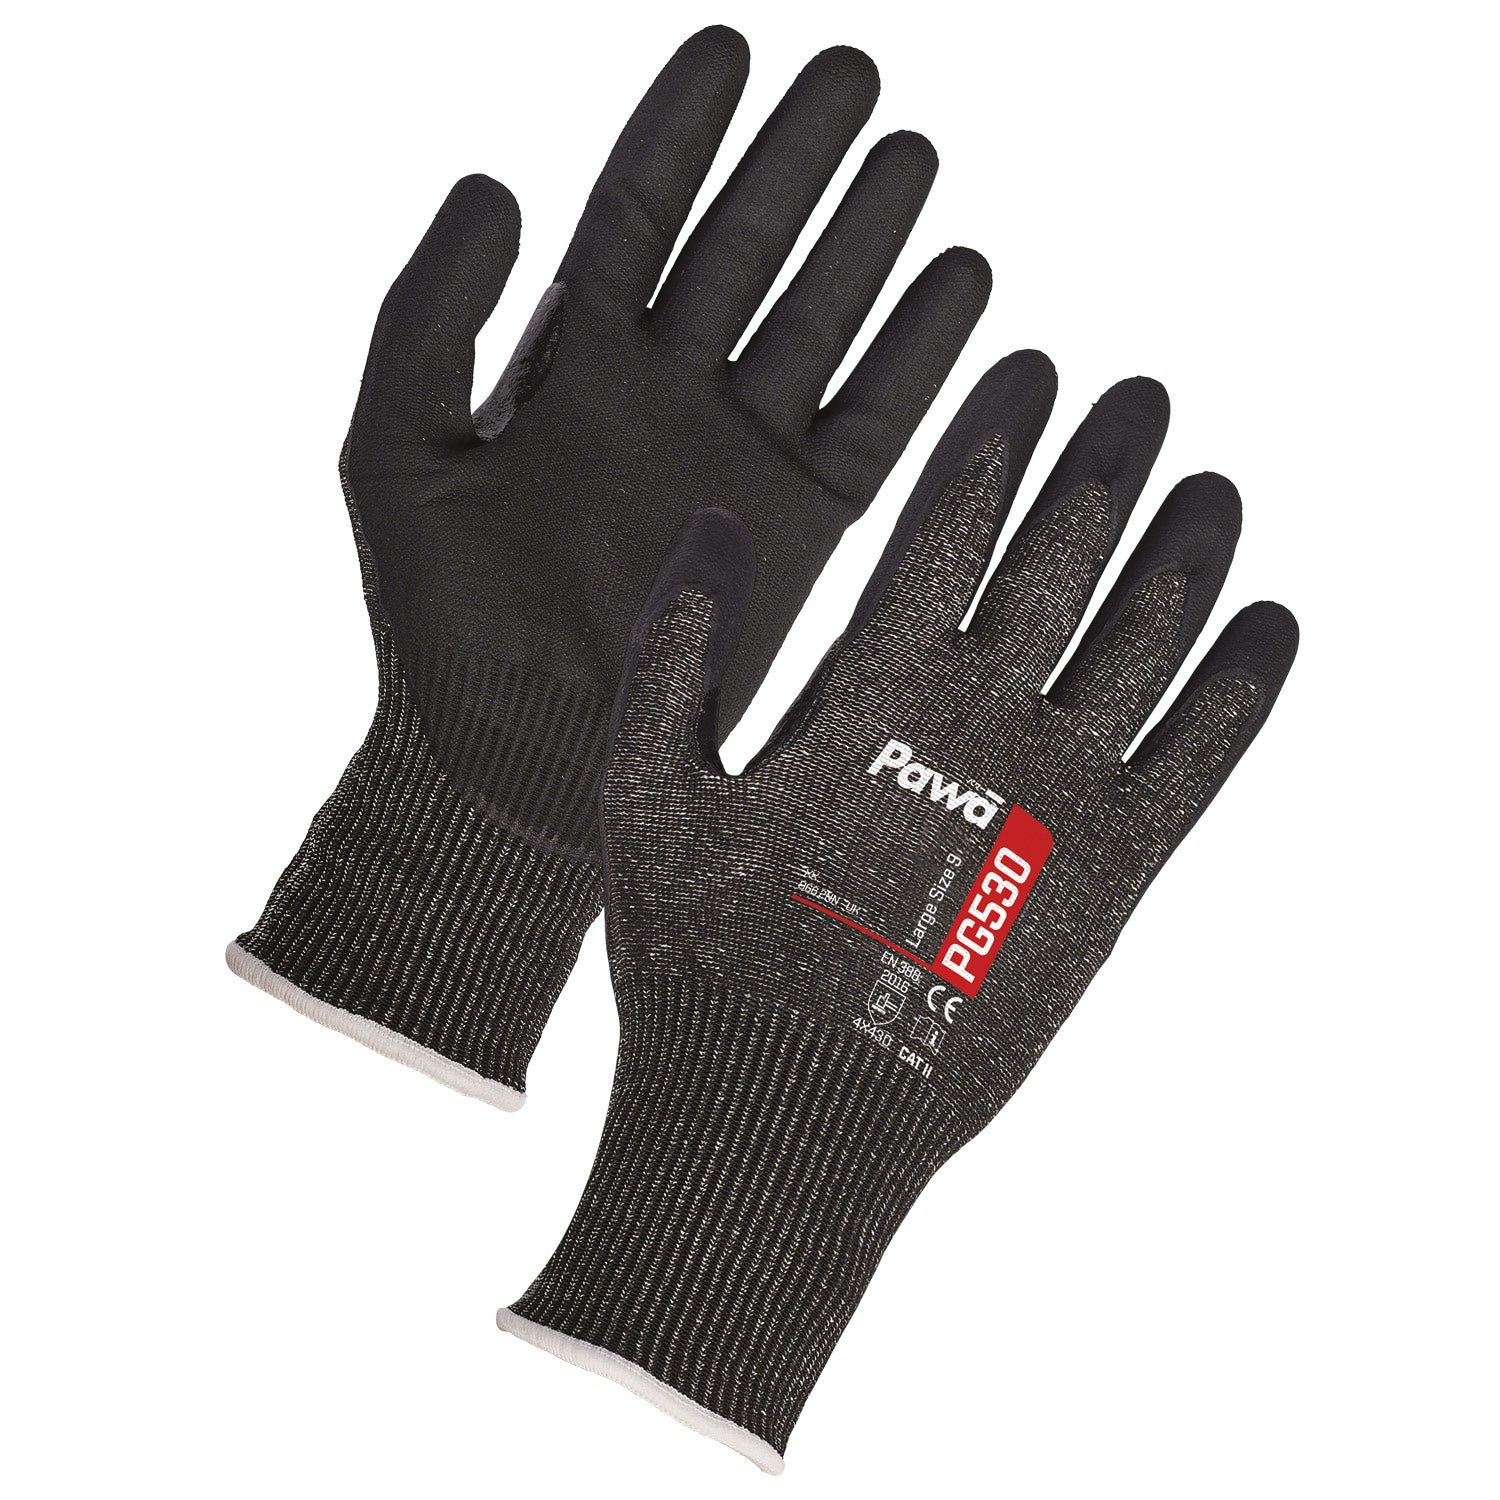 Supertouch Pawa PG530 Gloves